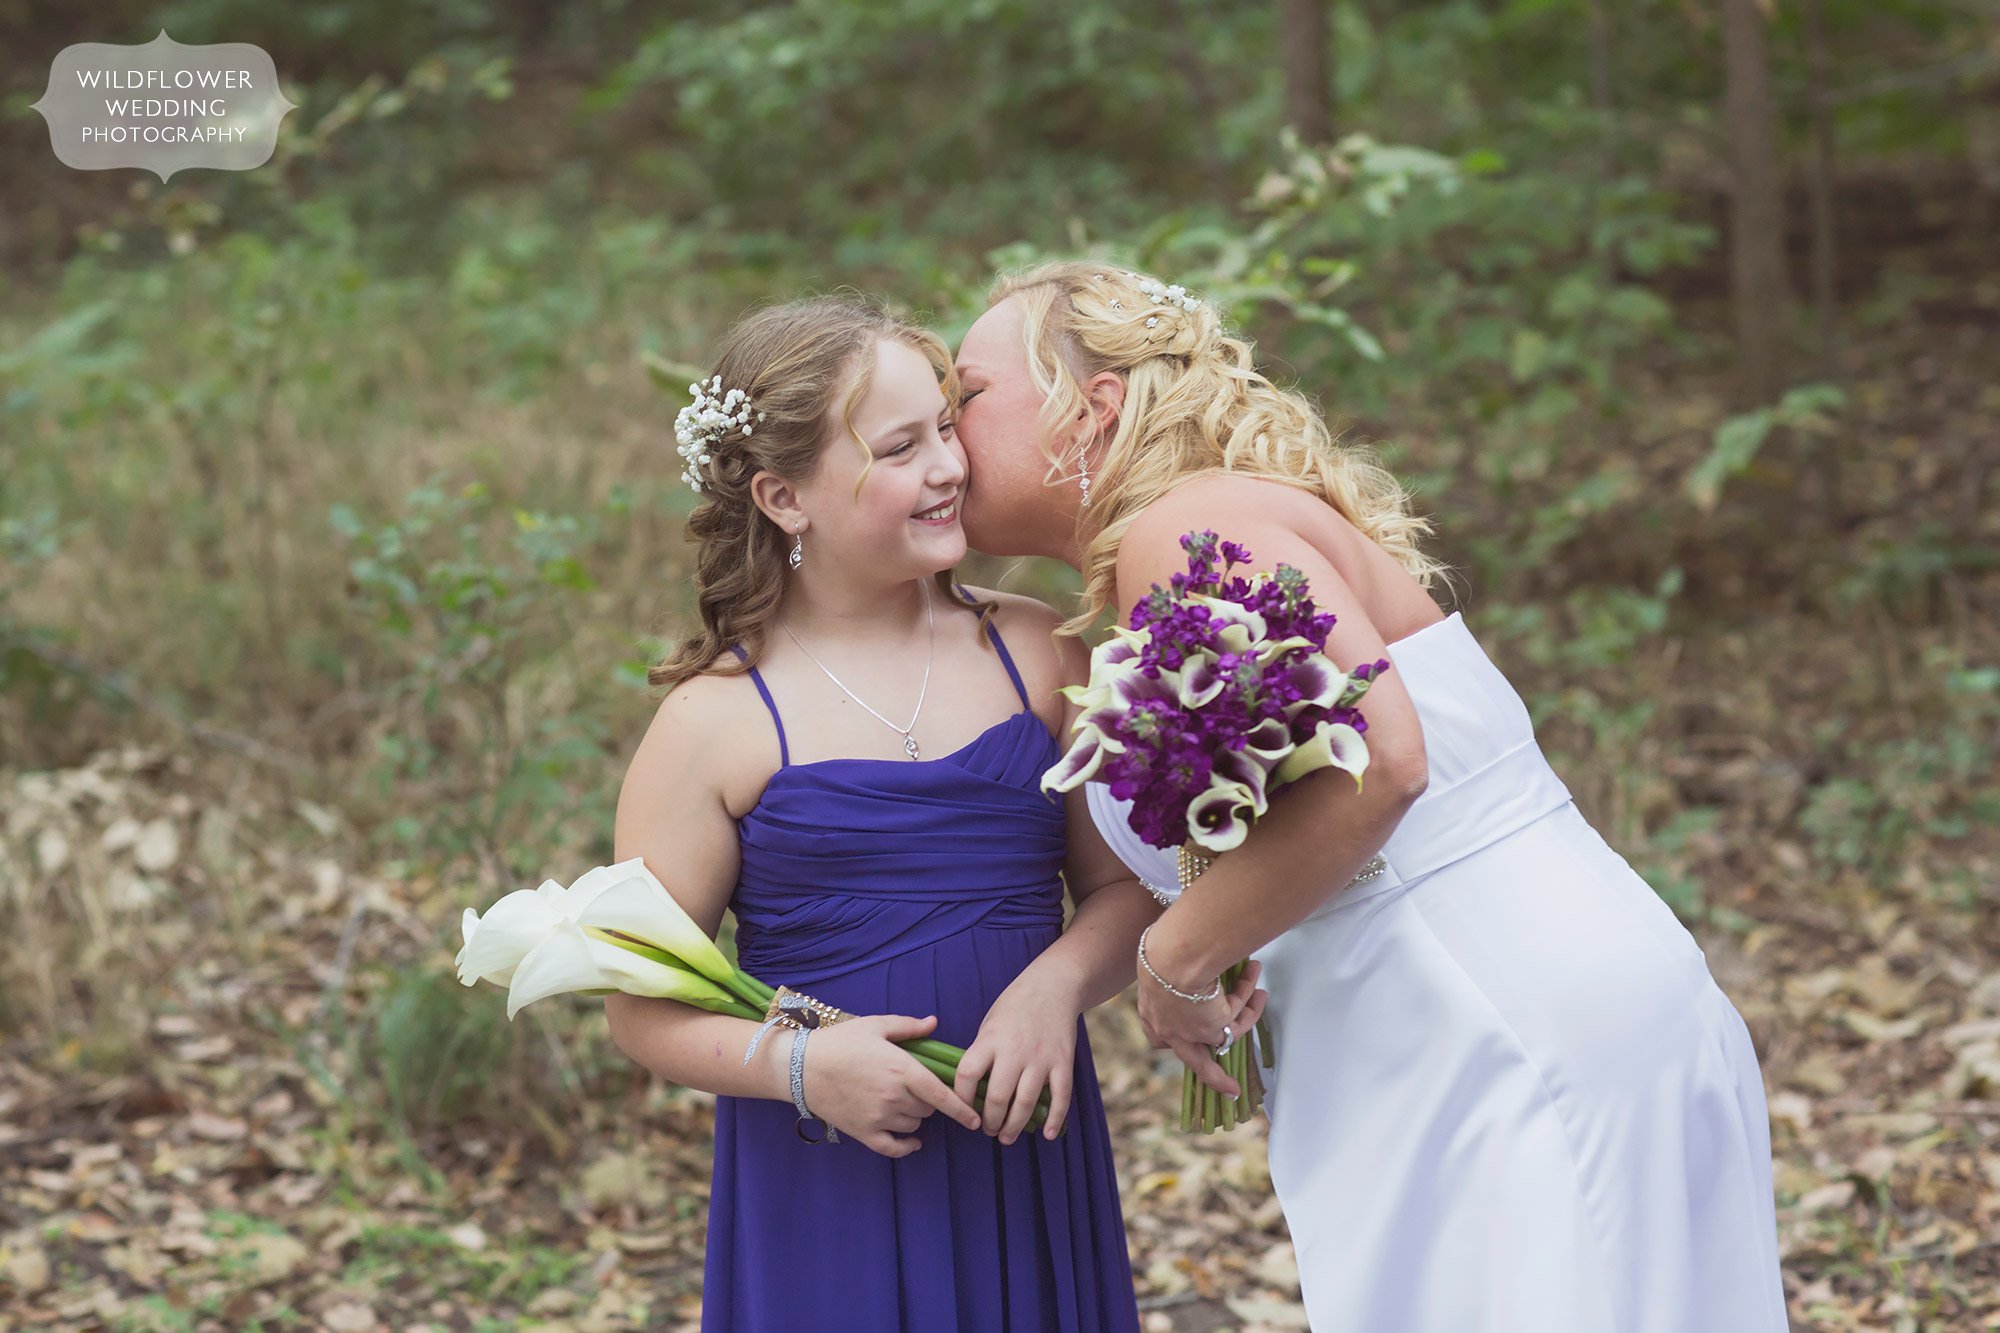 The bride kissing her daughter on the cheek at this KS barn wedding venue.